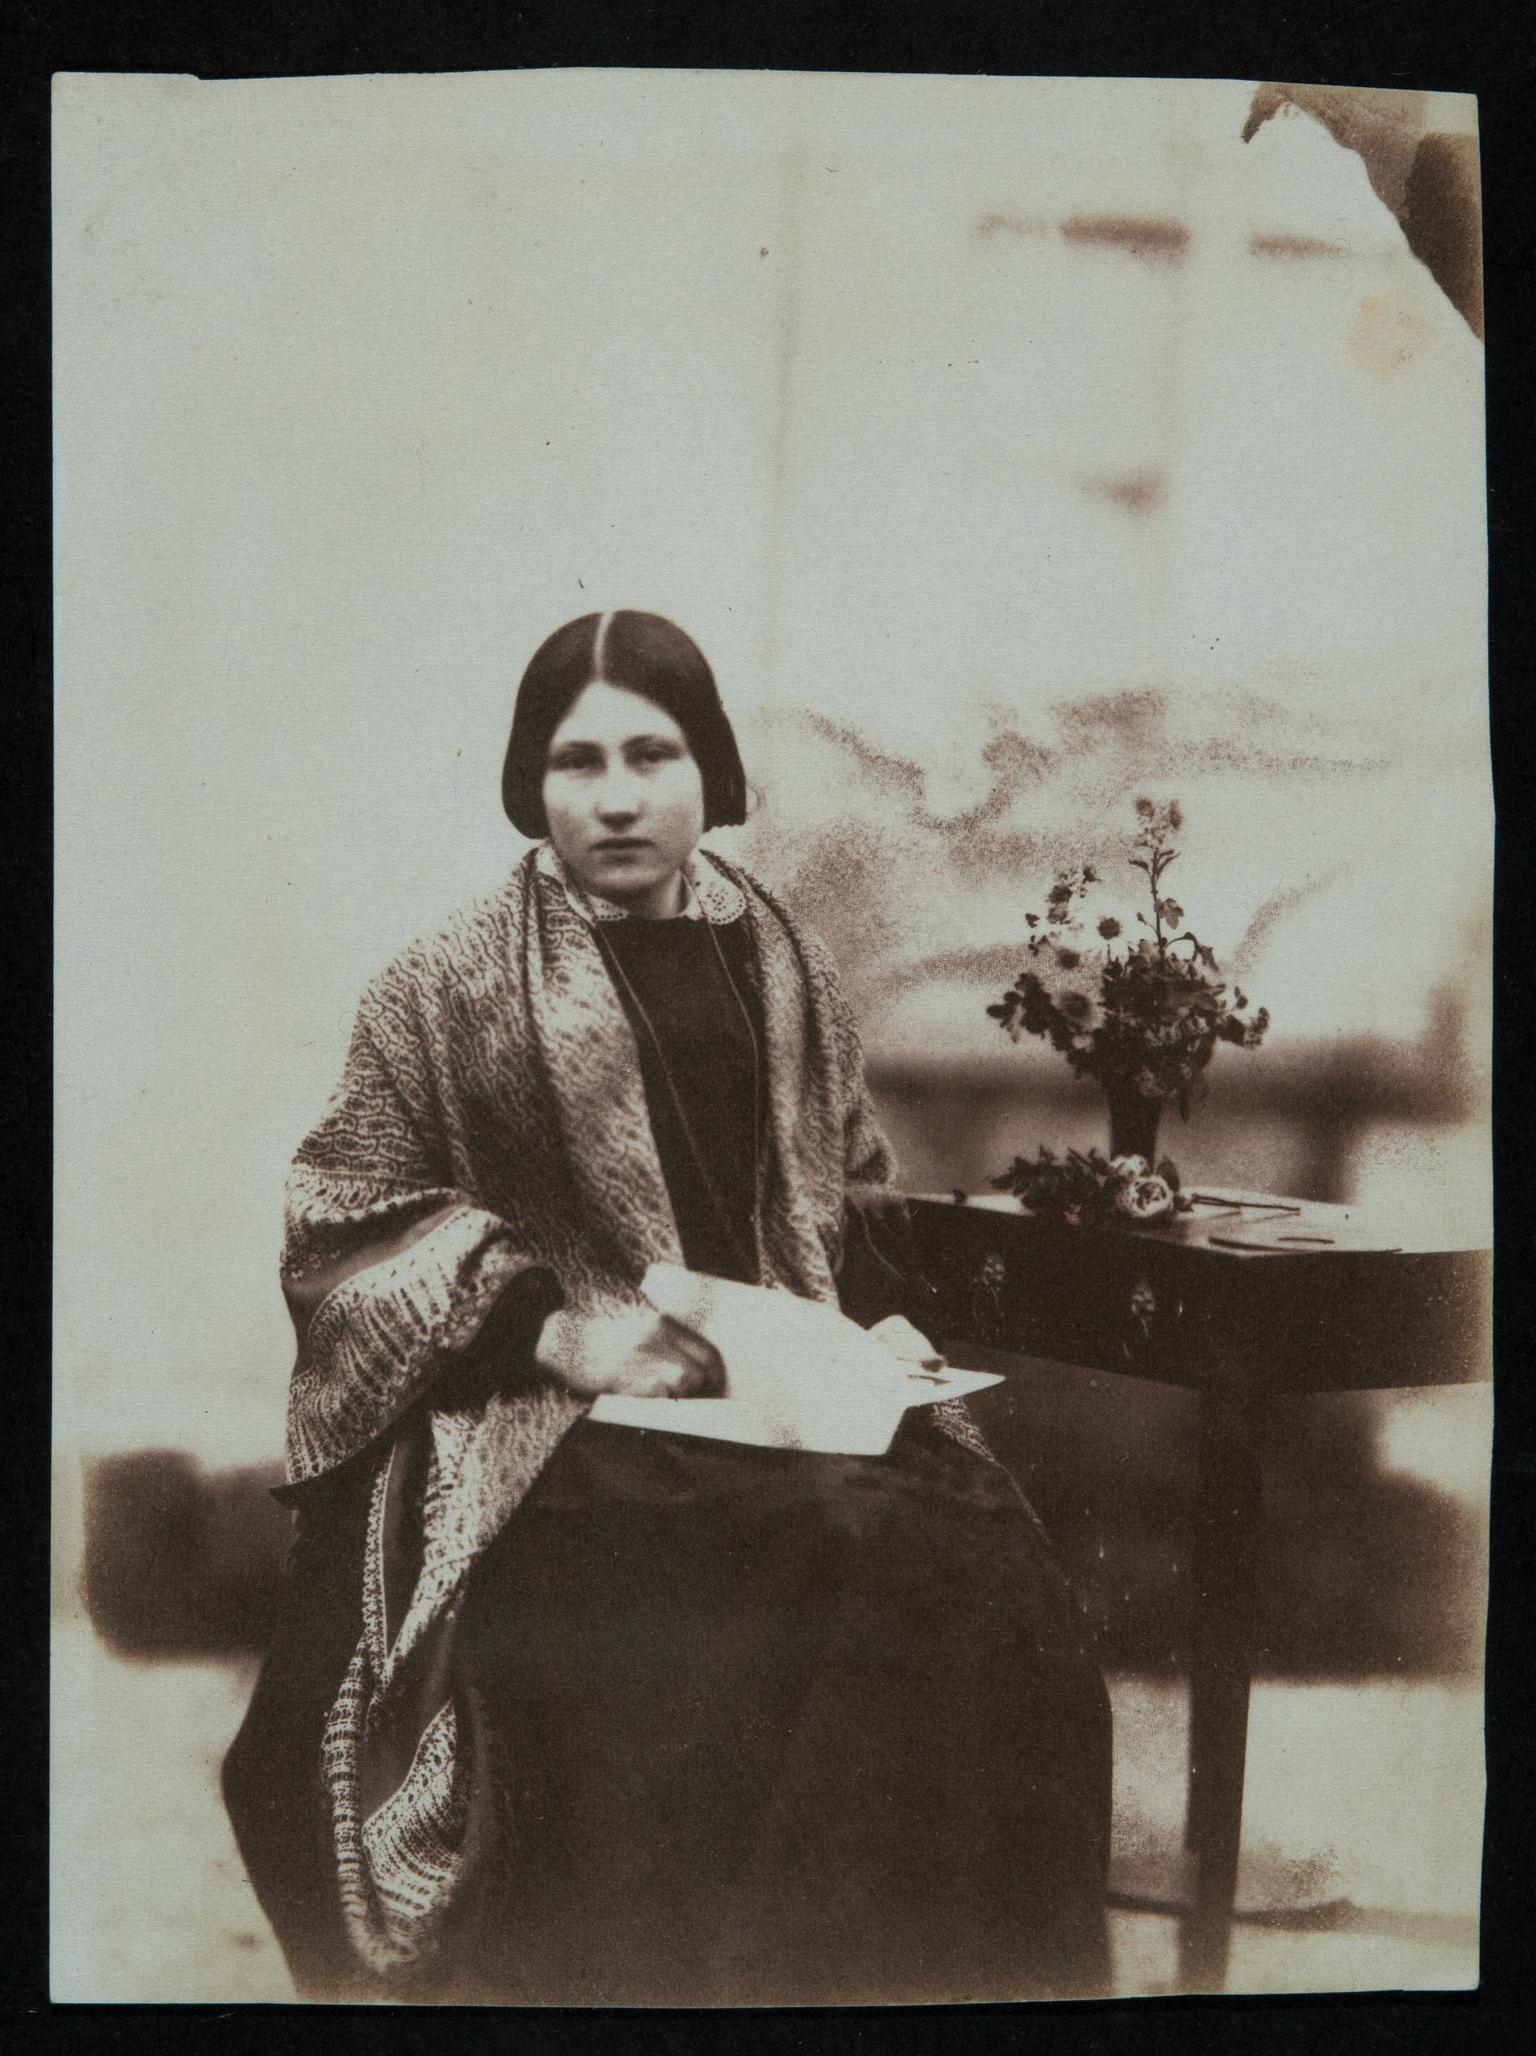 Thereza Llewelyn, photograph